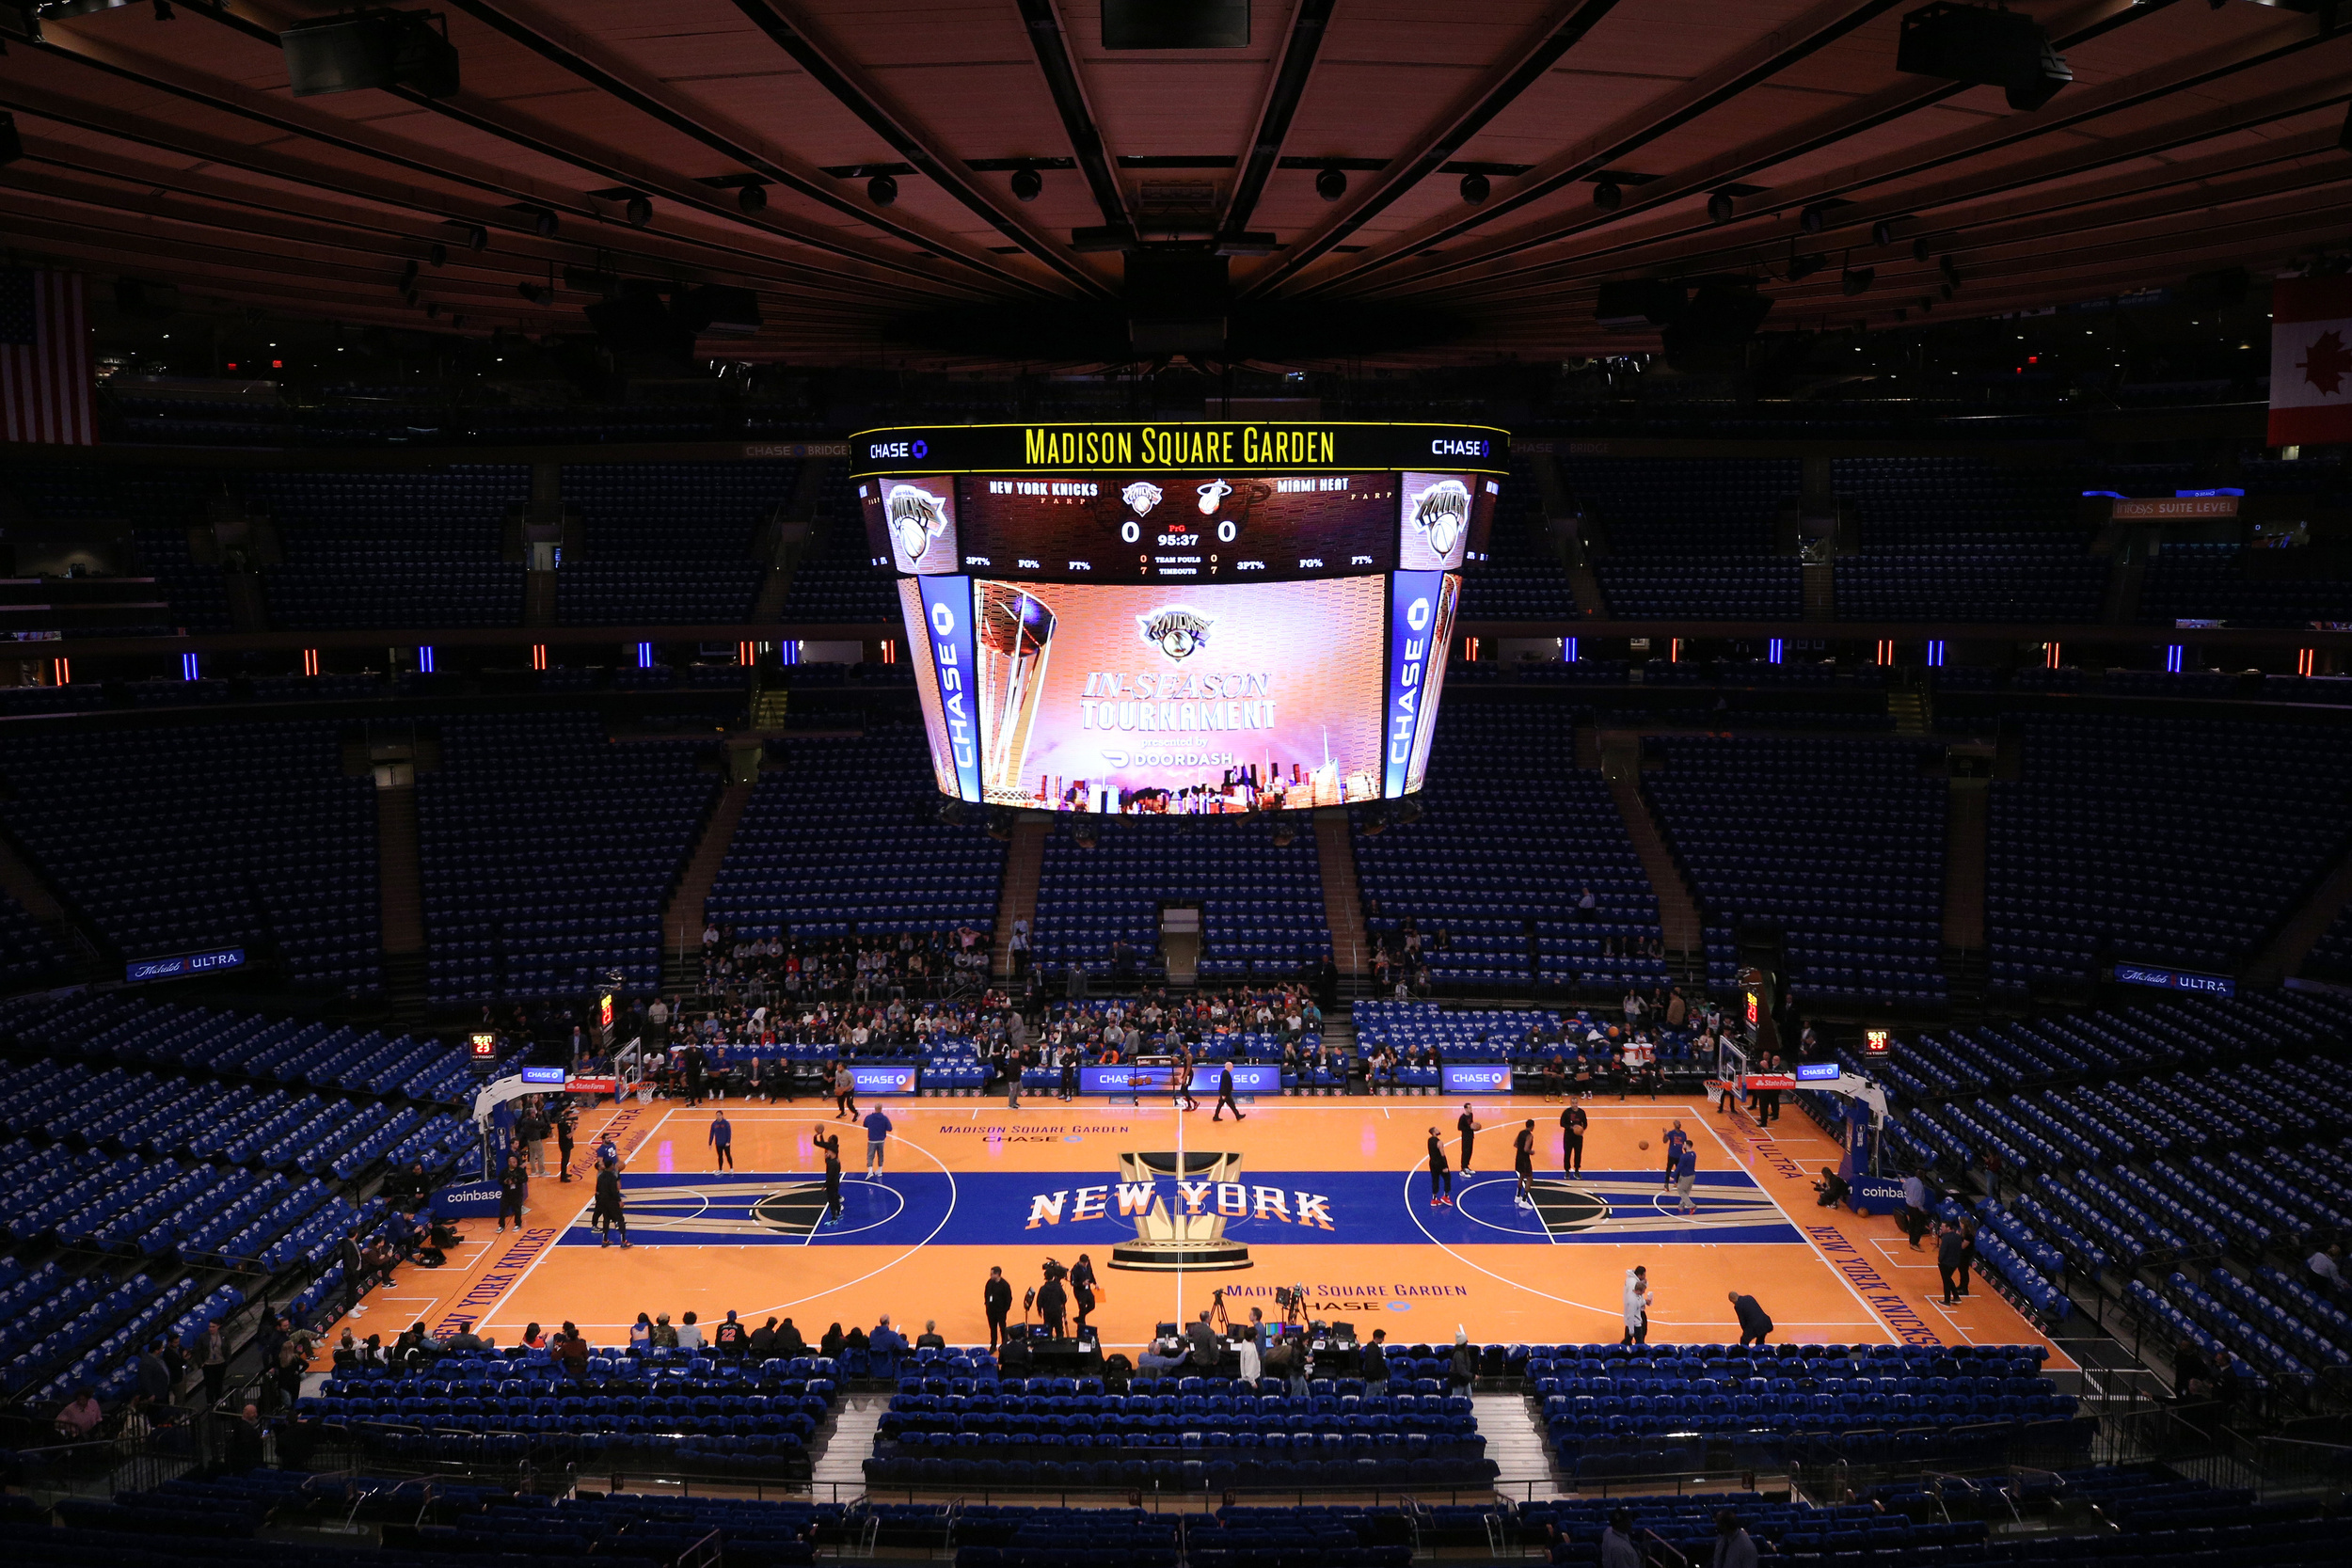 madison square garden jumbotron shows knicks looking way ahead to potential eastern conference finals appearance